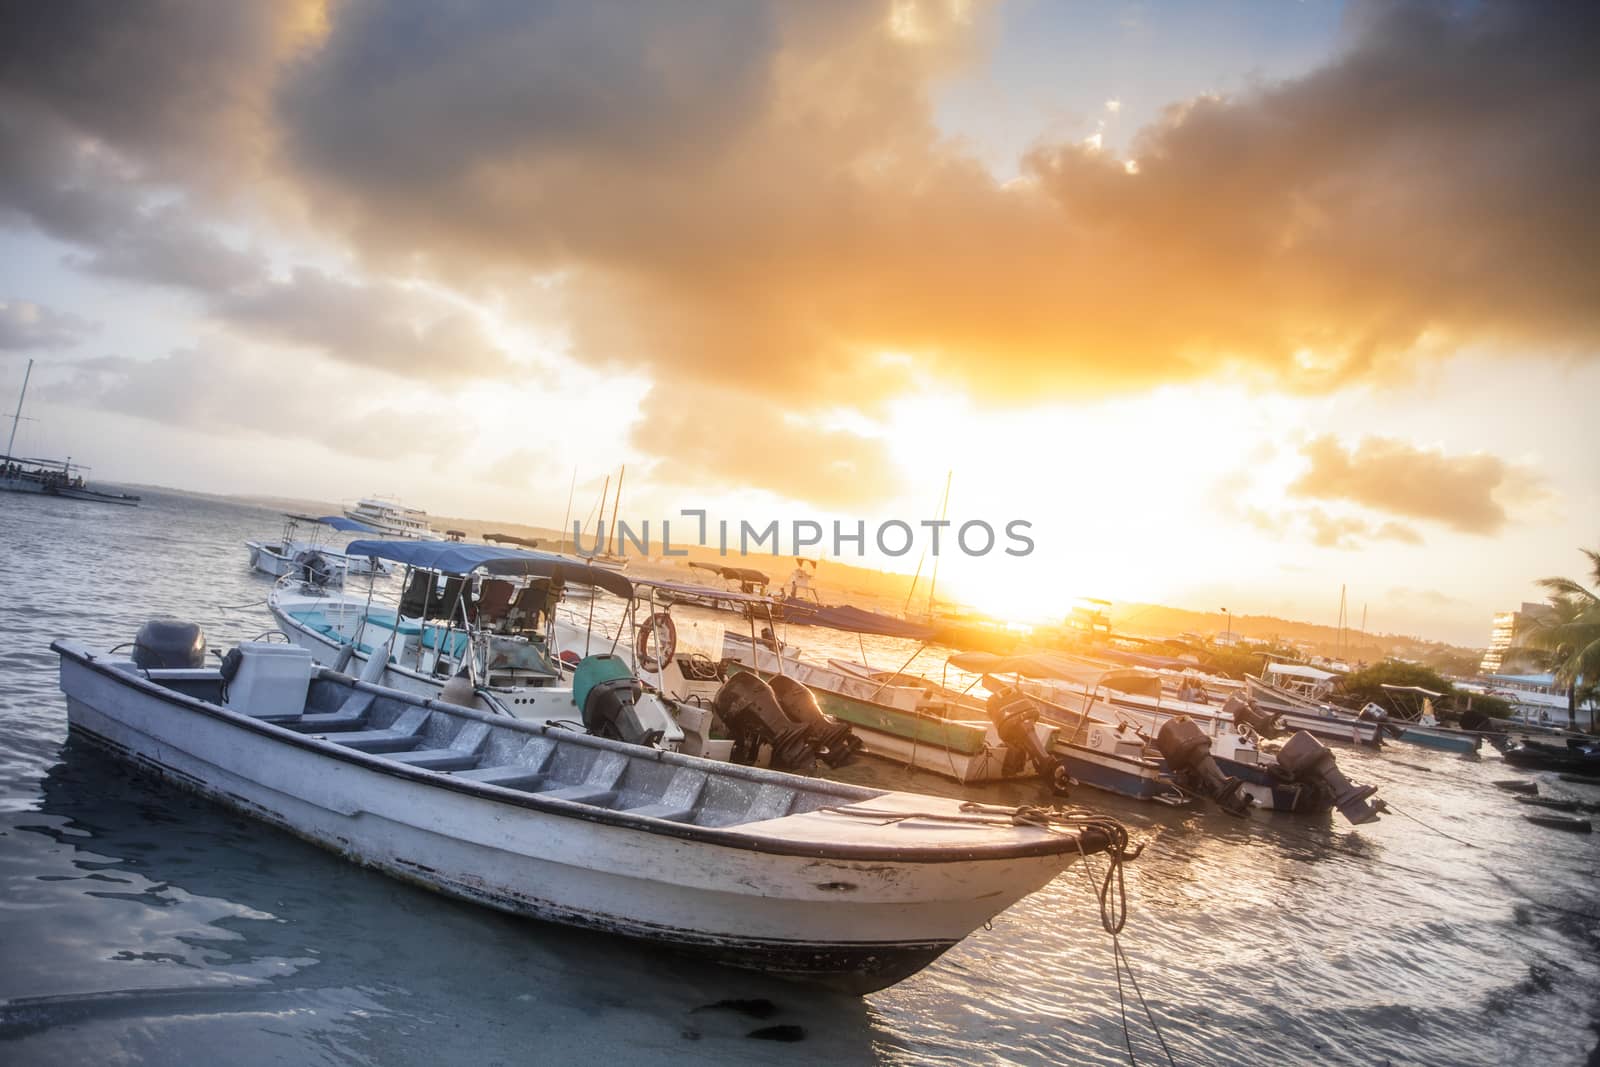 Amazing Scene (sorry I love this photo) of Many Boats on the Beach during the Sunset. - All logo Removed